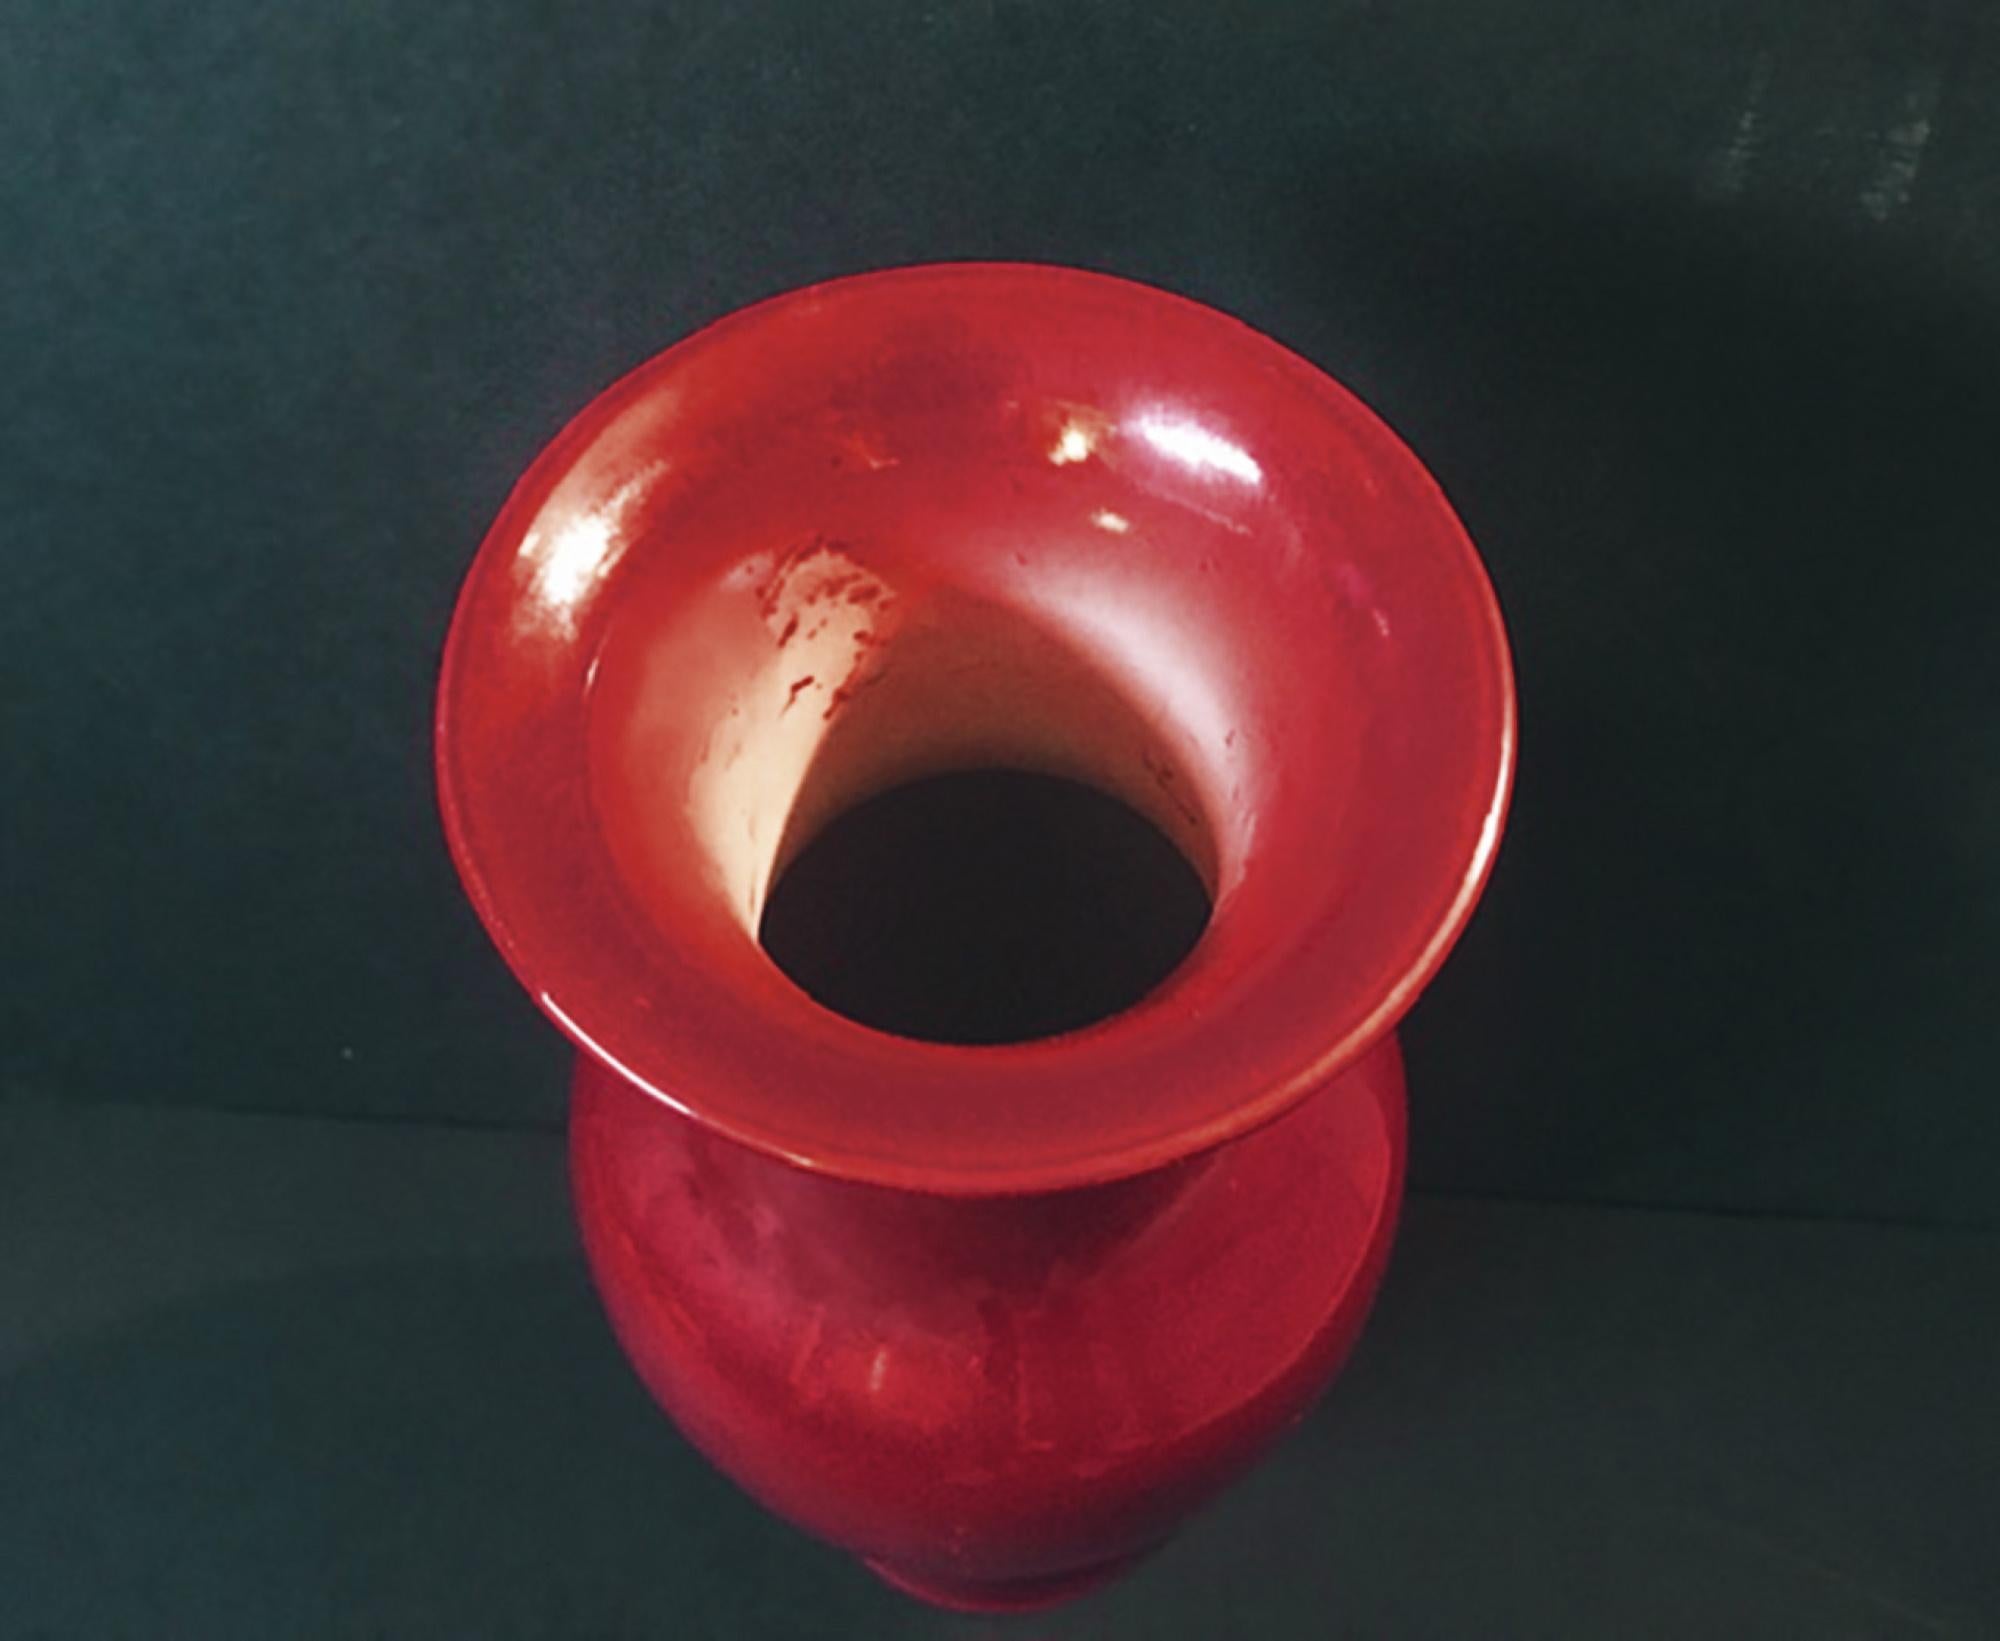 Early 20th century Chinese red porcelain Sang de Boeuf Oxblood vase

This large and elegant 19th century Chinese flambe oxblood vase has a deep copper red monochrome glaze. The glassy red color fades to light just under the lip. The baluster shaped